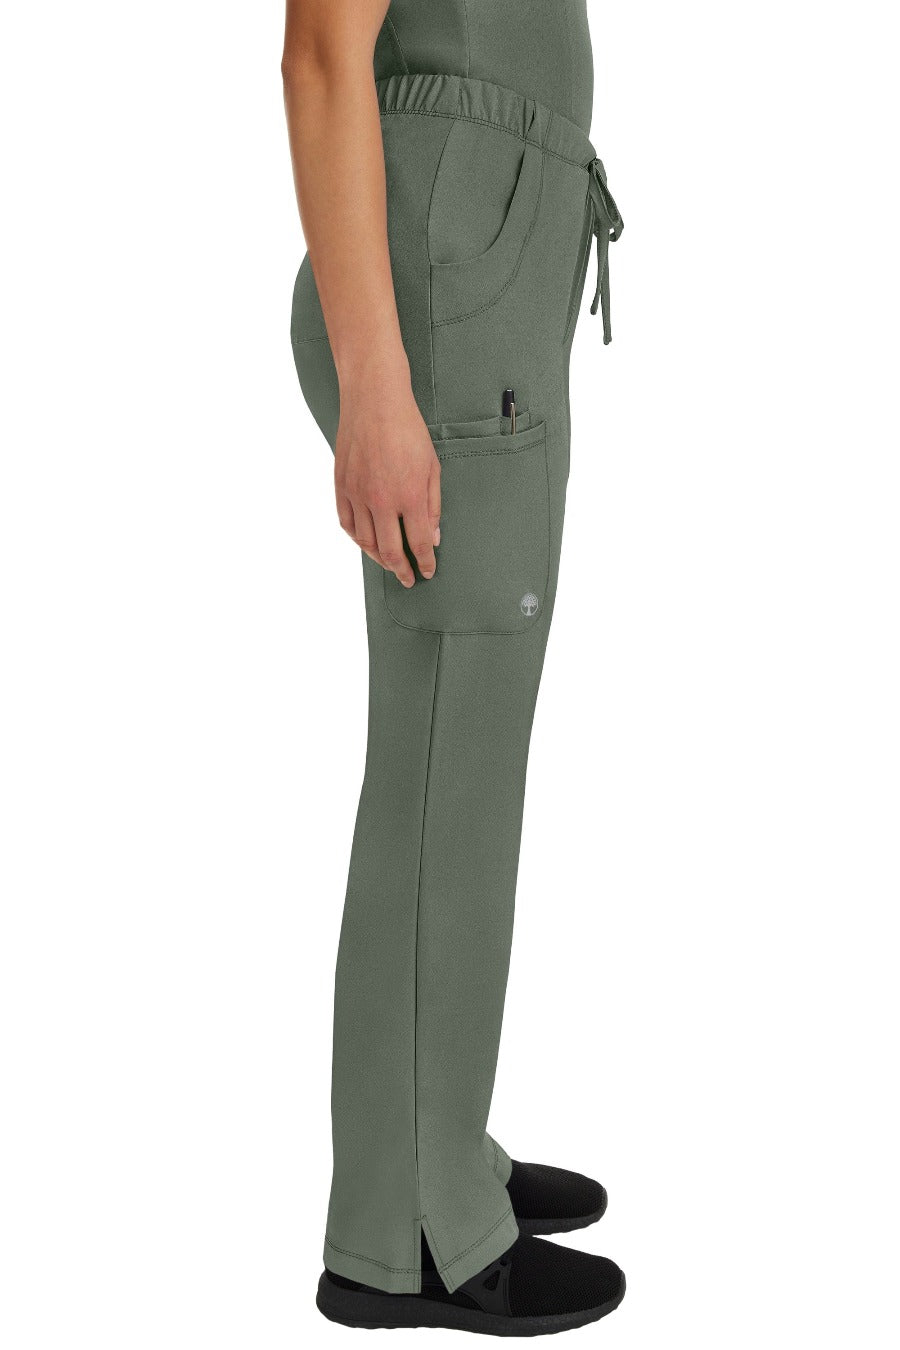 Healing Hands HH works pants in Olive green from Coulee Scrubs